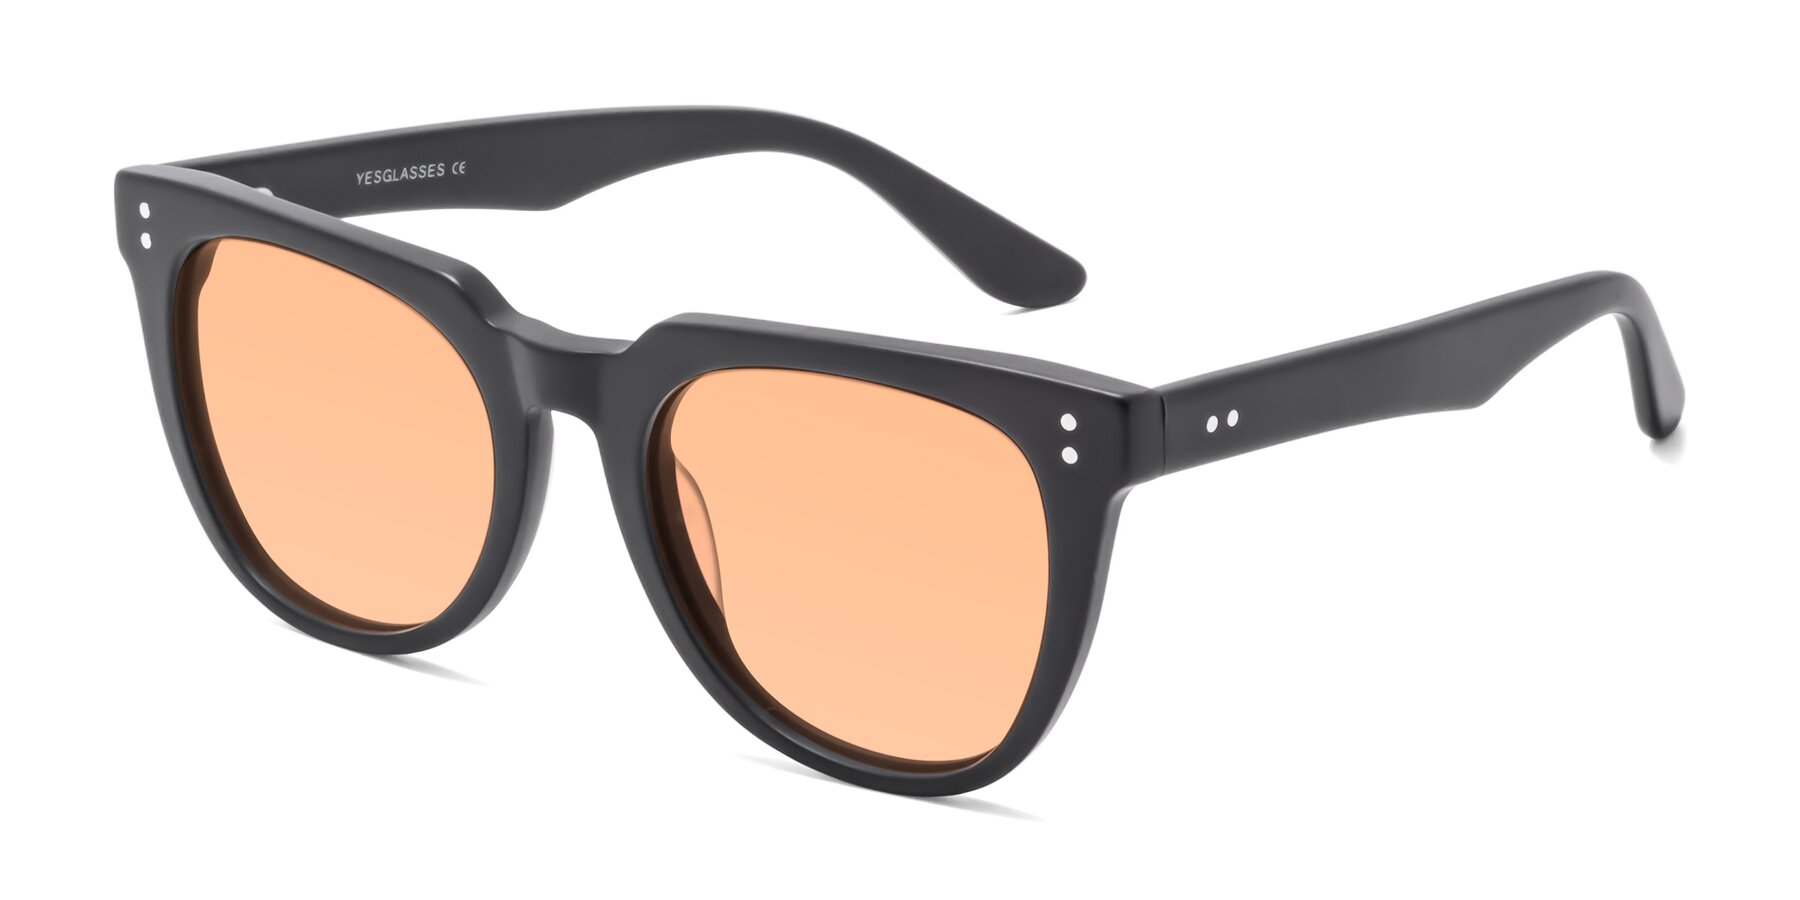 Angle of Graceful in Matte Black with Light Orange Tinted Lenses